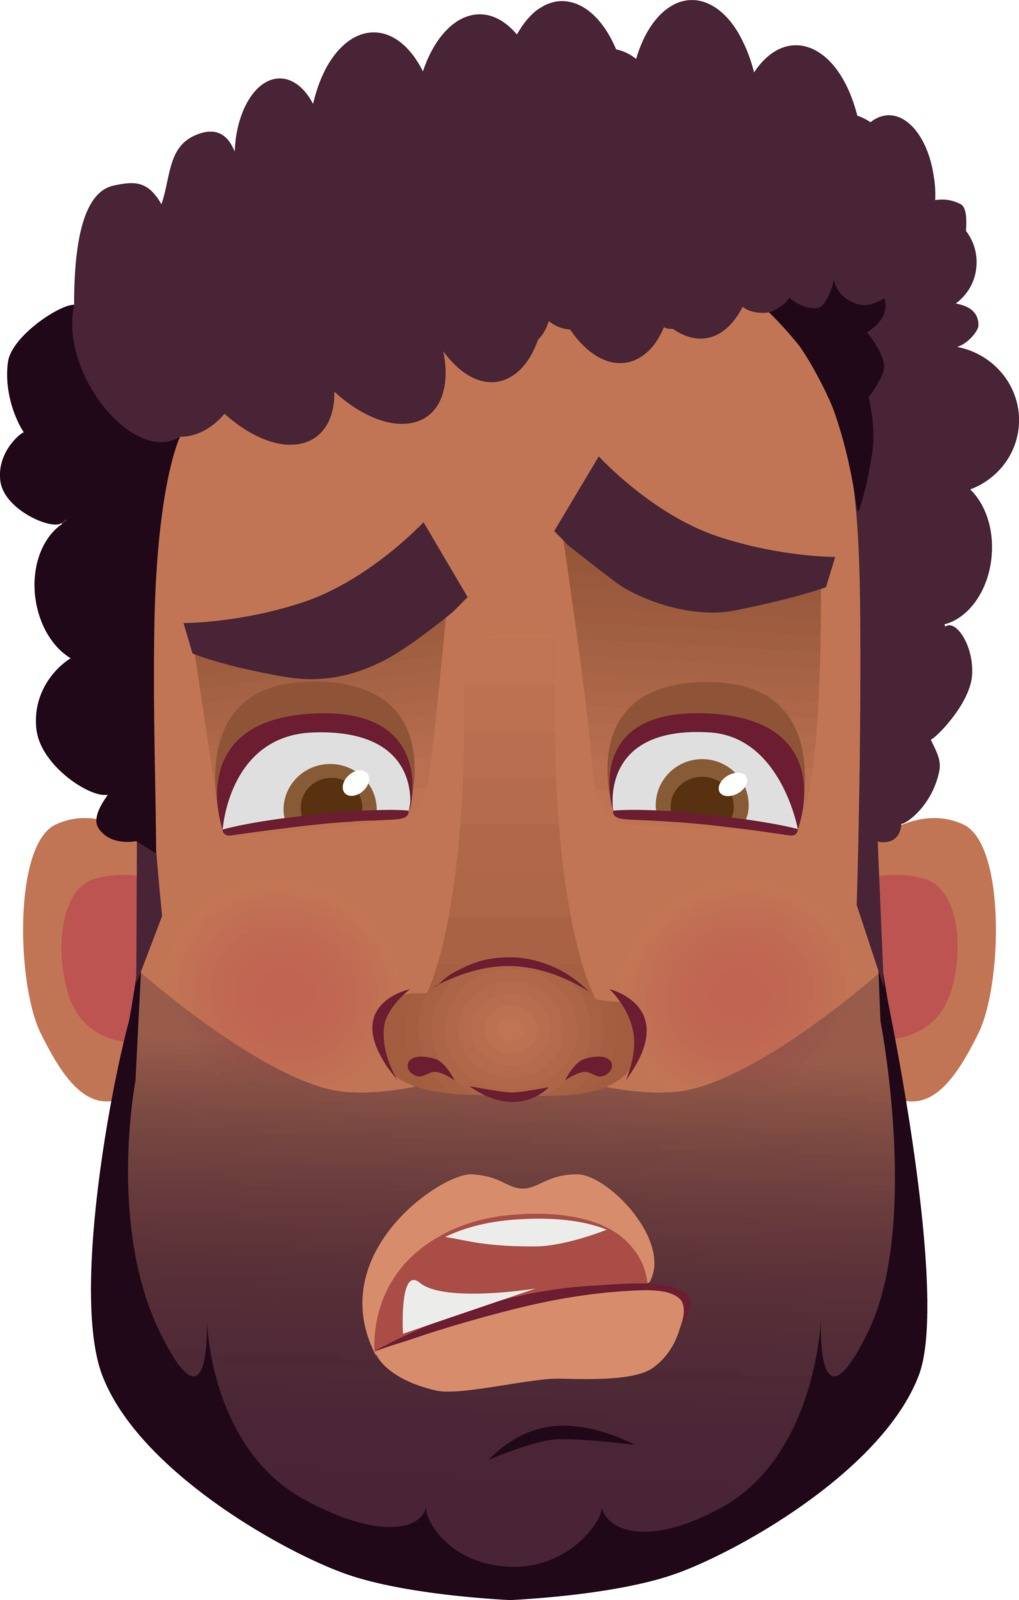 African american man icon. Face of African man vector illustrations.